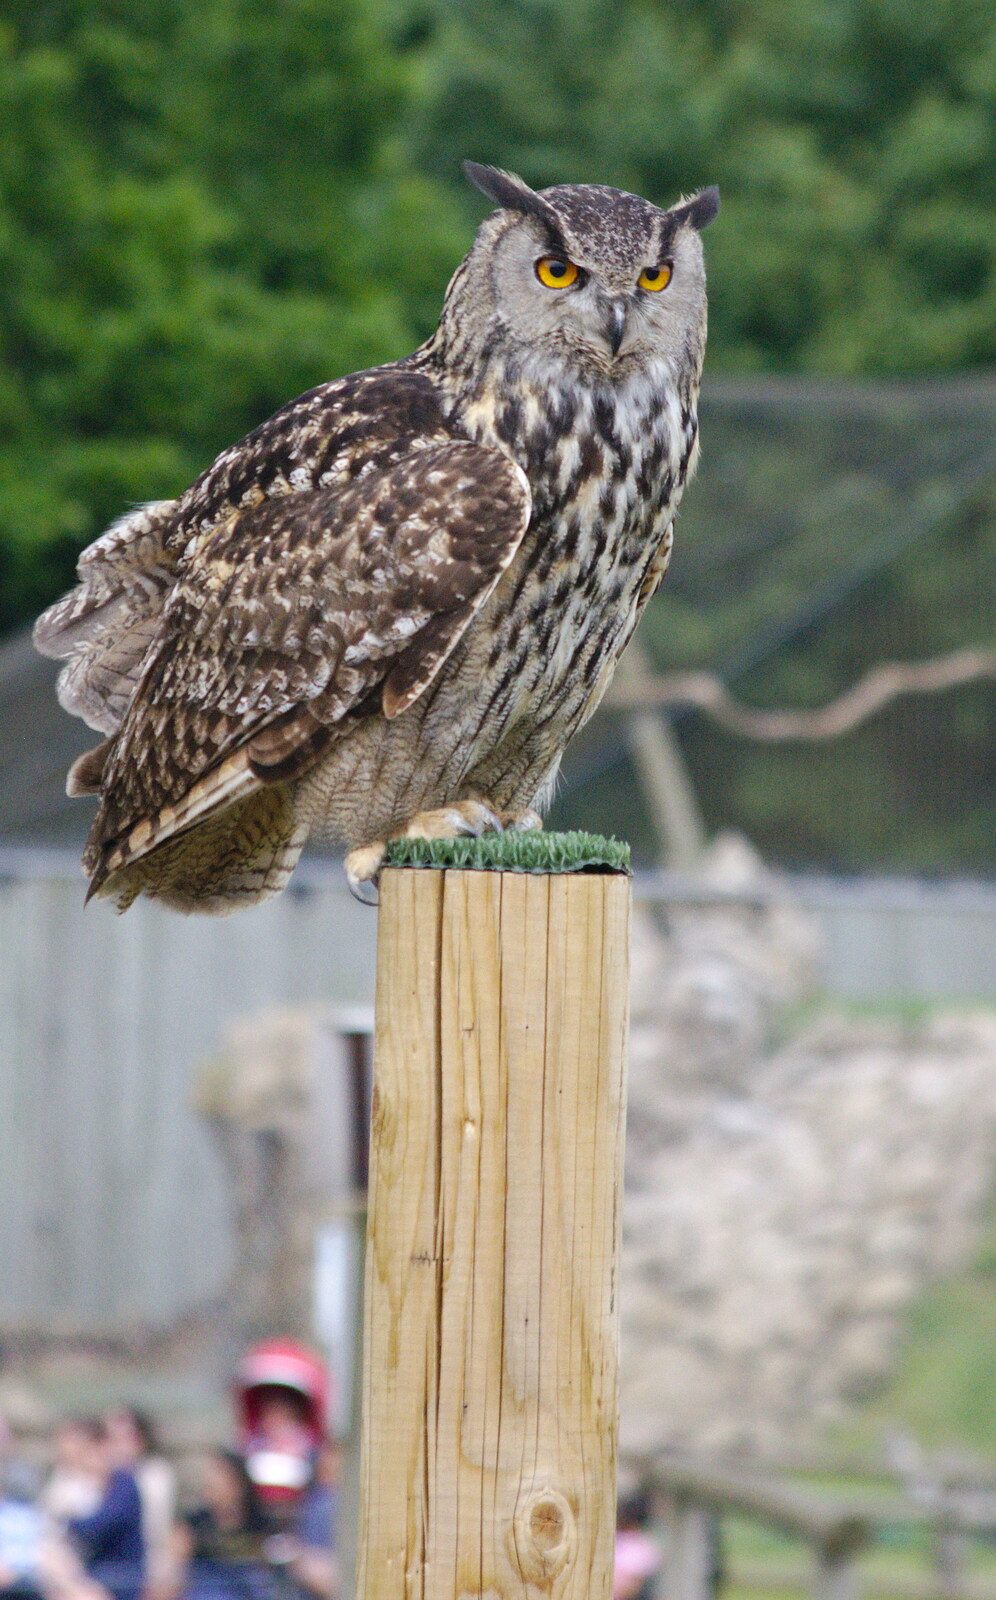 A Birthday Trip to the Zoo, Banham, Norfolk - 26th May 2014: An owl on its perch